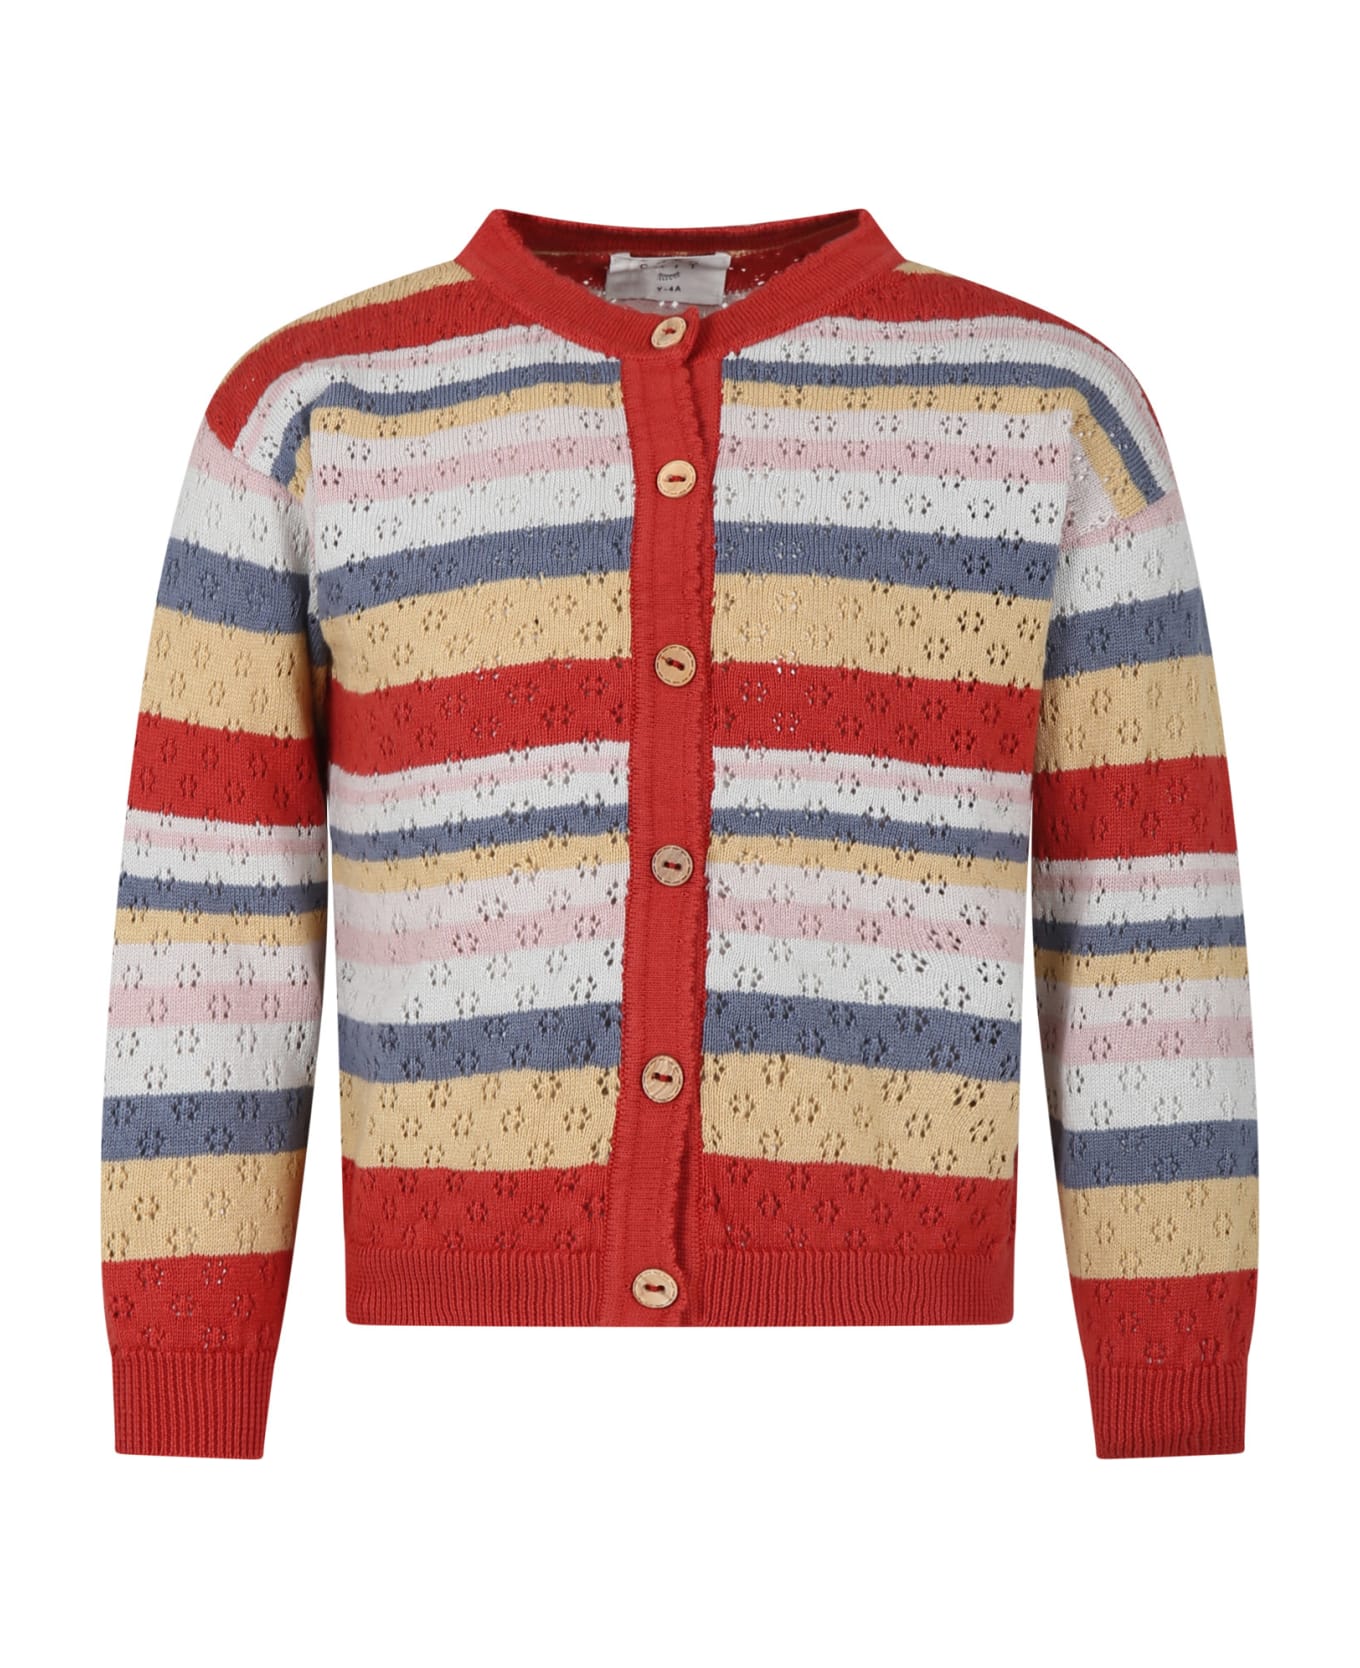 Coco Au Lait Red Cardigan For Girl With Striped Pattern - Multicolor ニットウェア＆スウェットシャツ